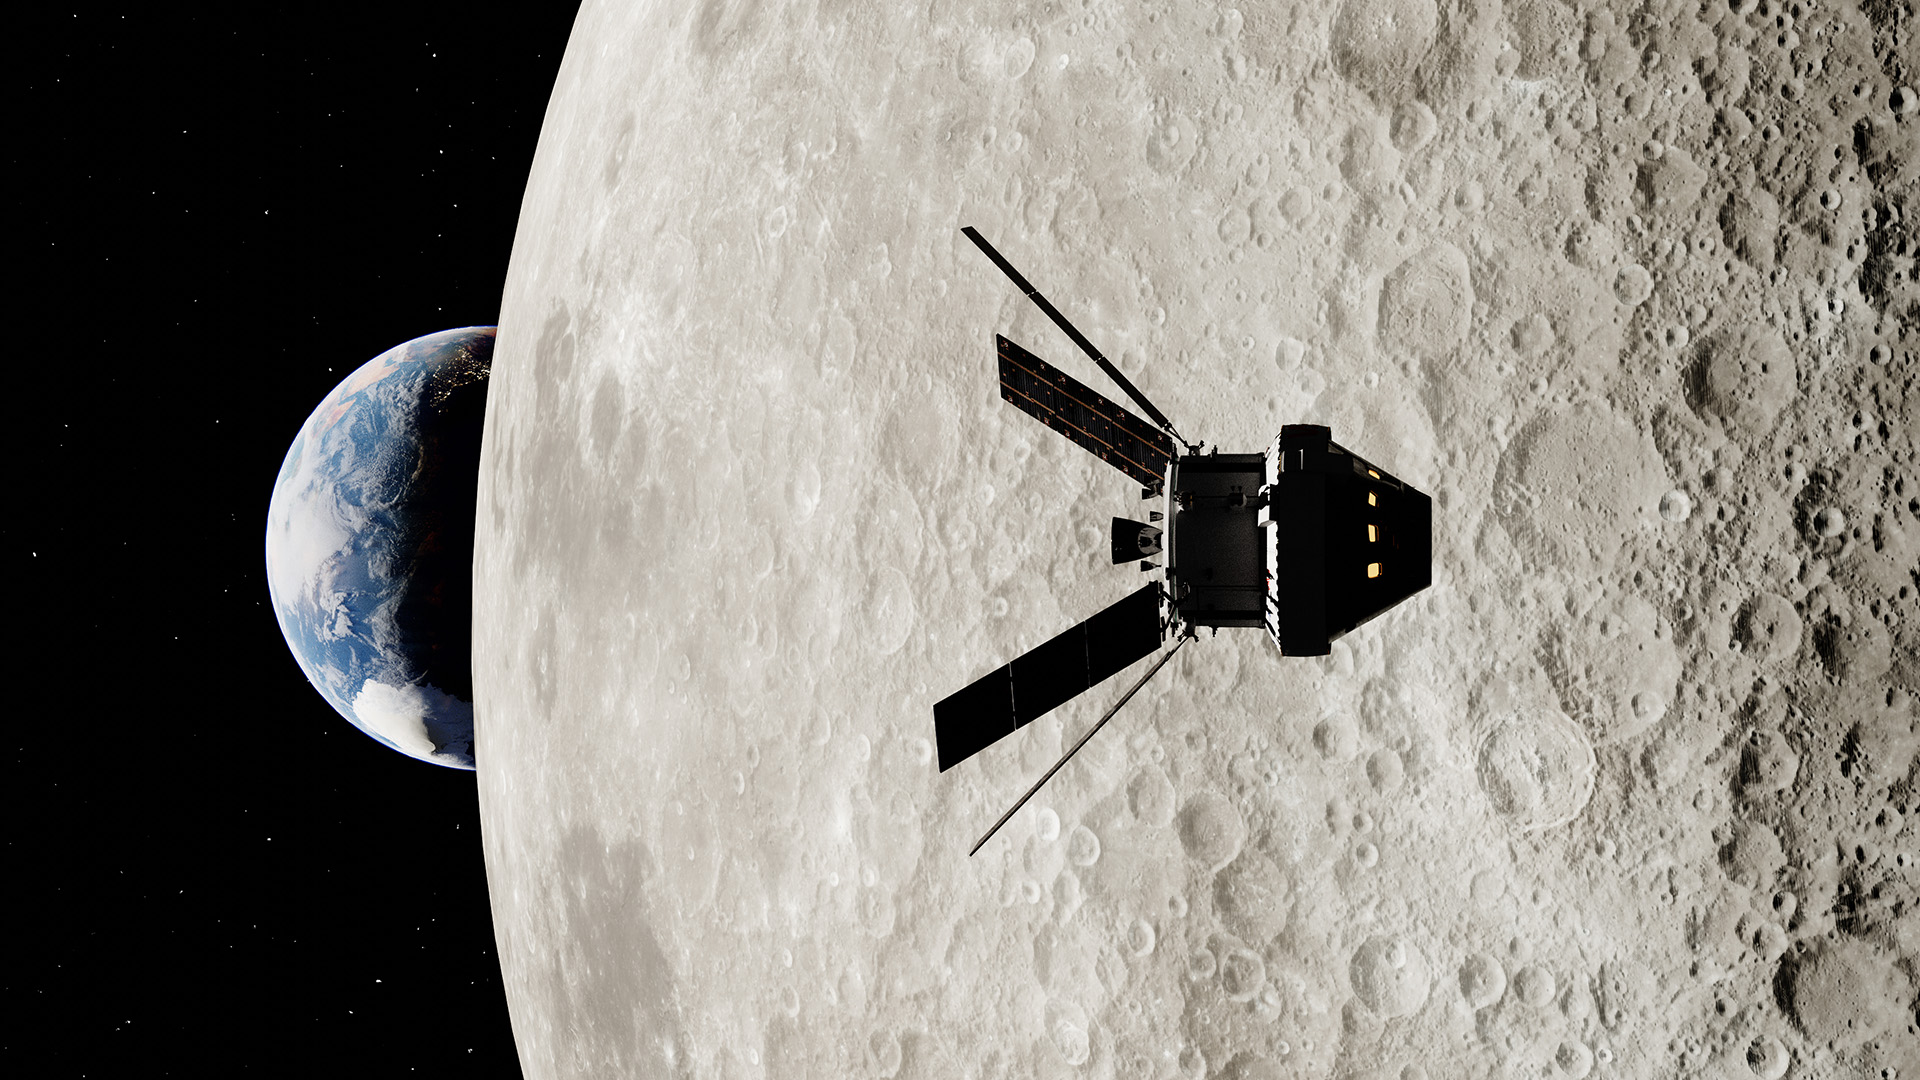 Liam Yanulis' 3D models and animations of the Orion spacecraft are helping to tell the story of Artemis and NASA's future exploration plans.